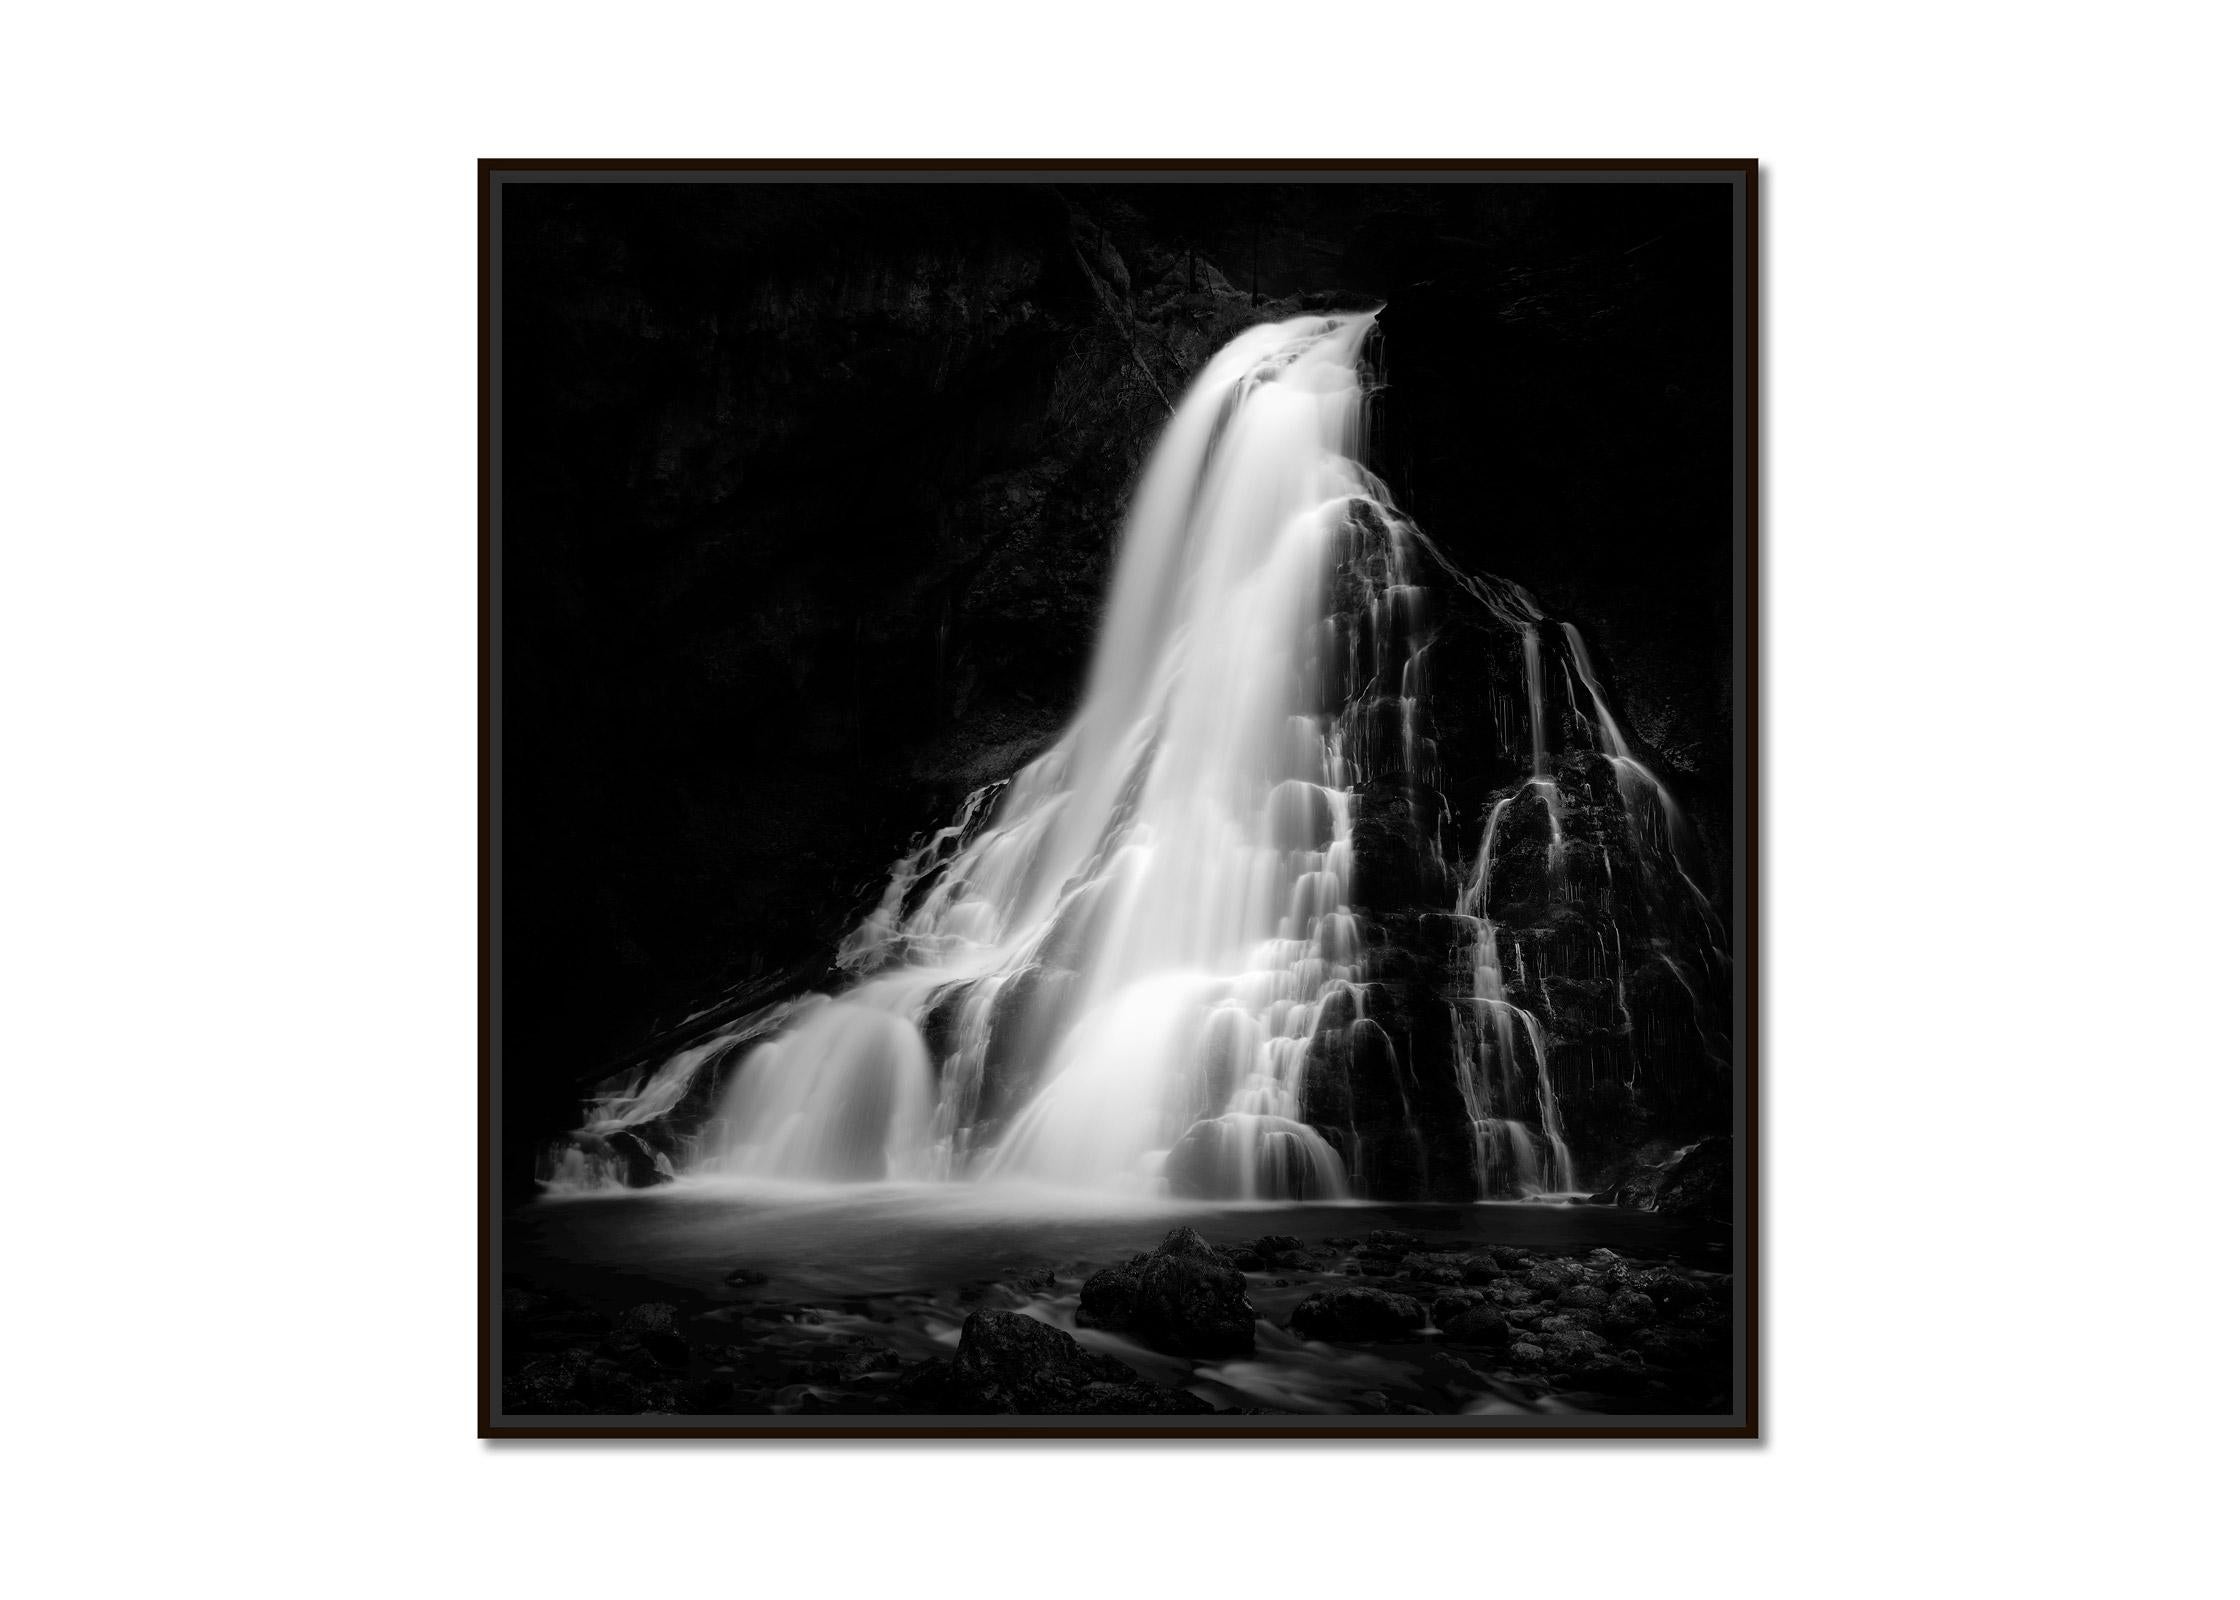 Golling Falls, waterfall, black and white art photography, waterscape, landscape - Photograph by Gerald Berghammer